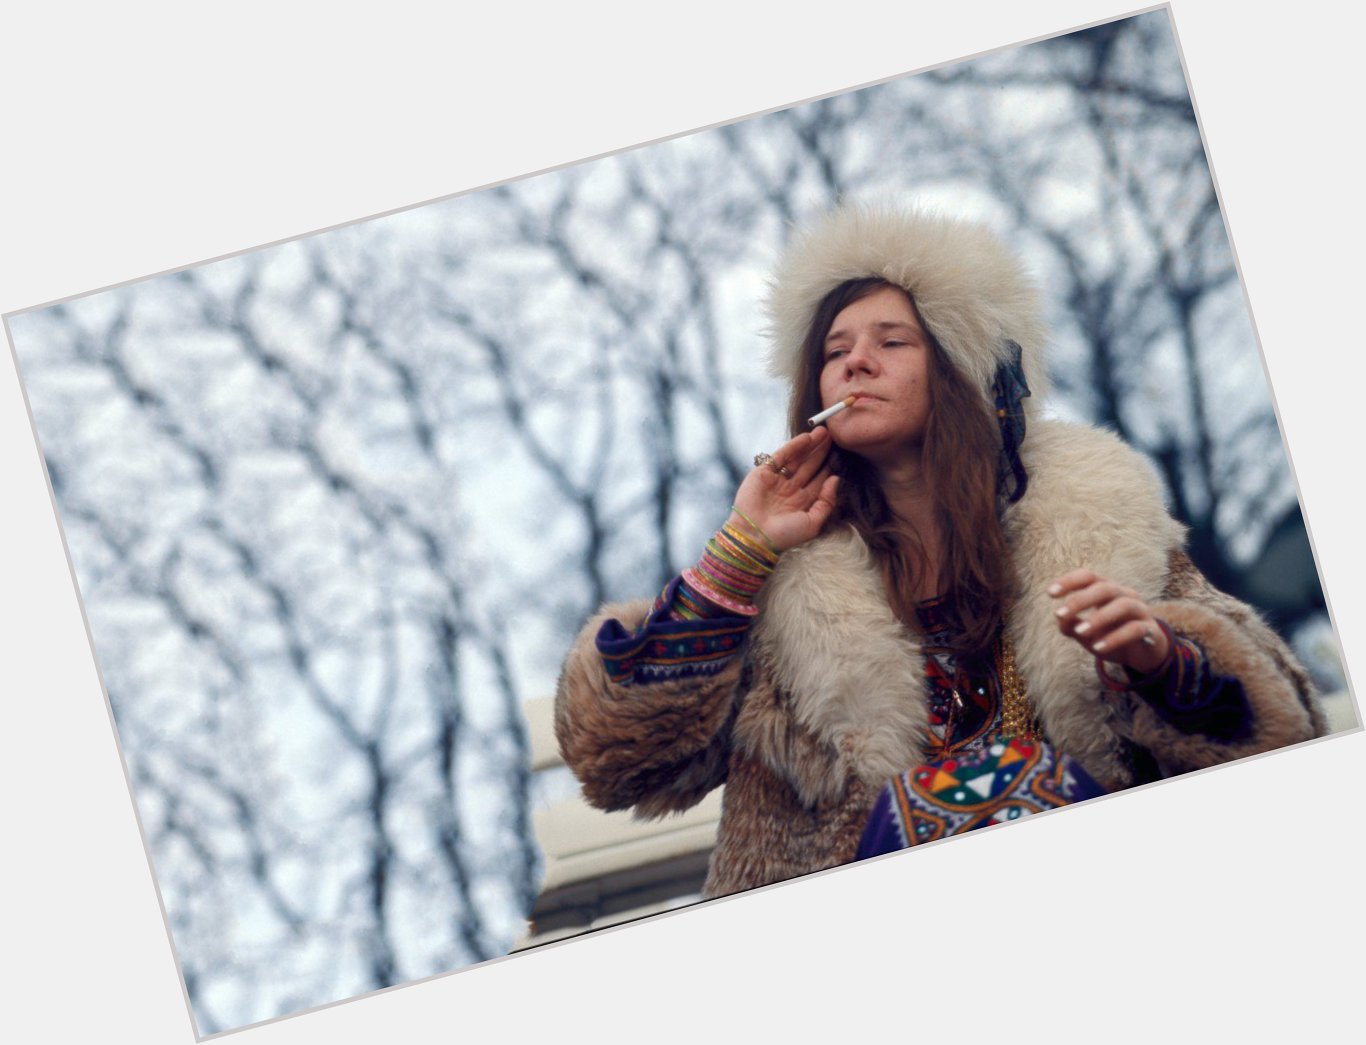 Happy birthday to Janis Joplin! One of the best female musicians of all time. Keep on rockin RIP Janis 